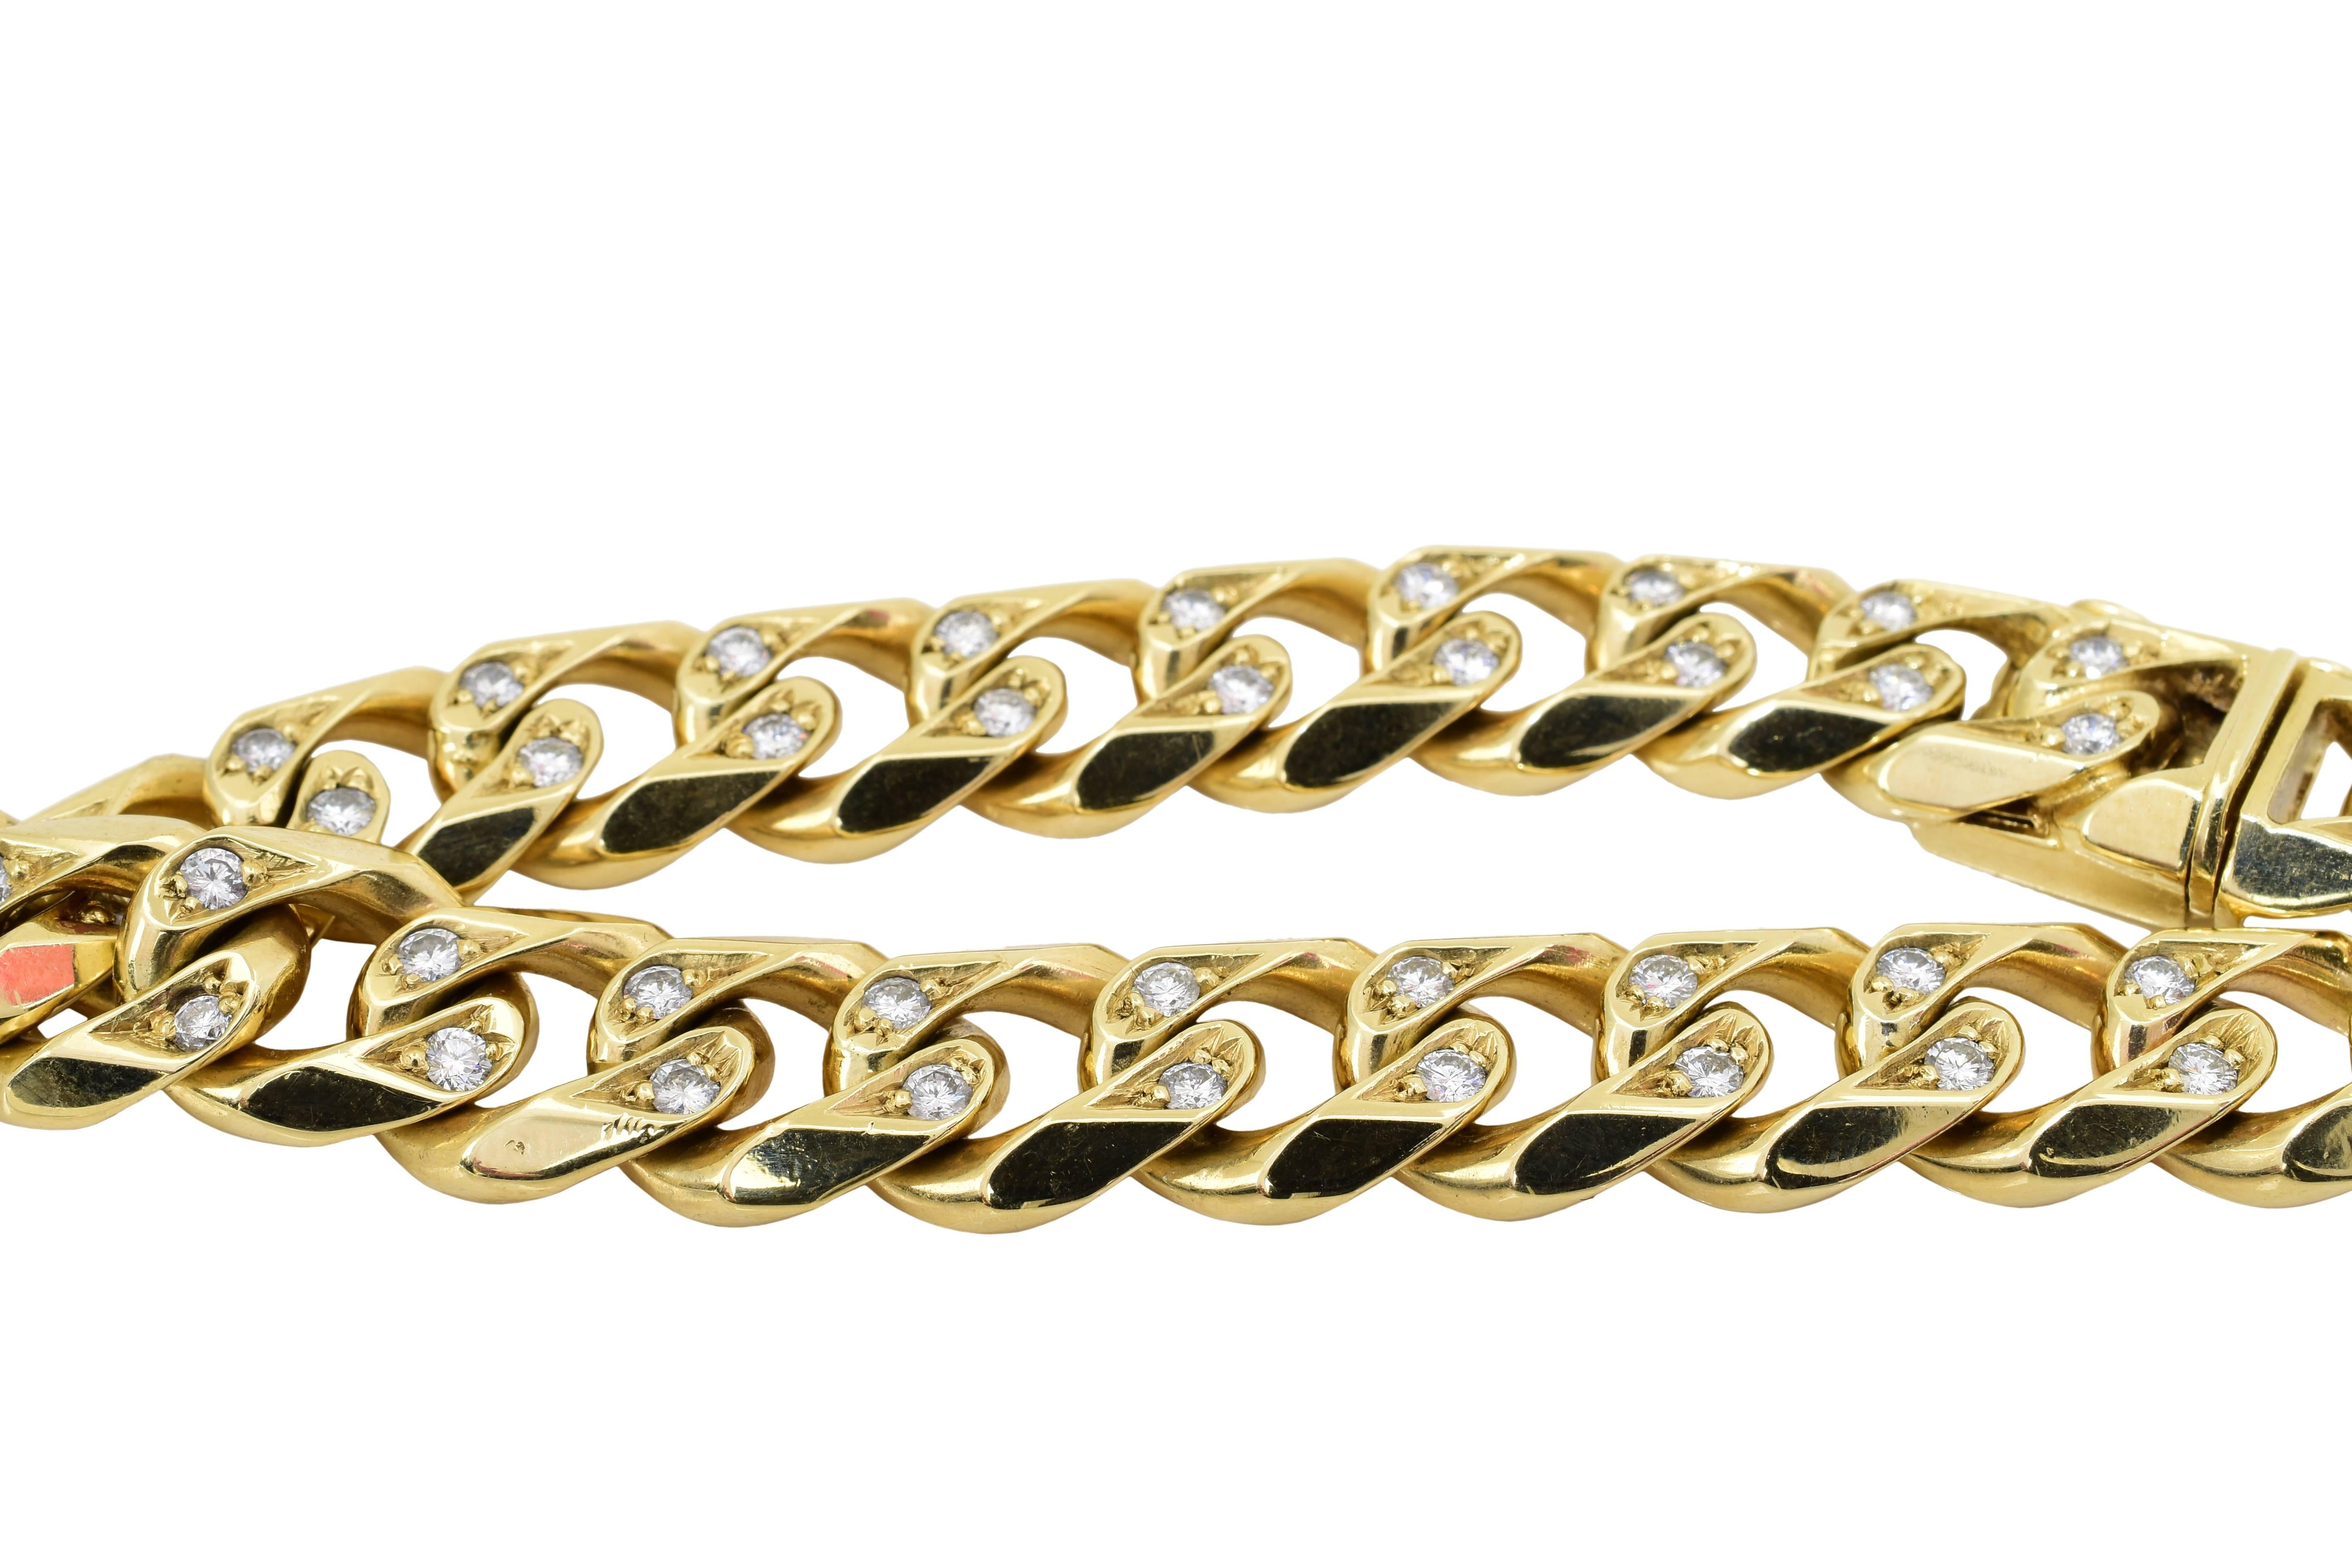 An elegant chain link bracelet in 14k yellow gold. 61 grams total weight of gold, with 2.50 carats in round brilliant cut diamonds, G-H in color and VS1-SI1 in clarity. The bracelet measures 8 inches in length. 